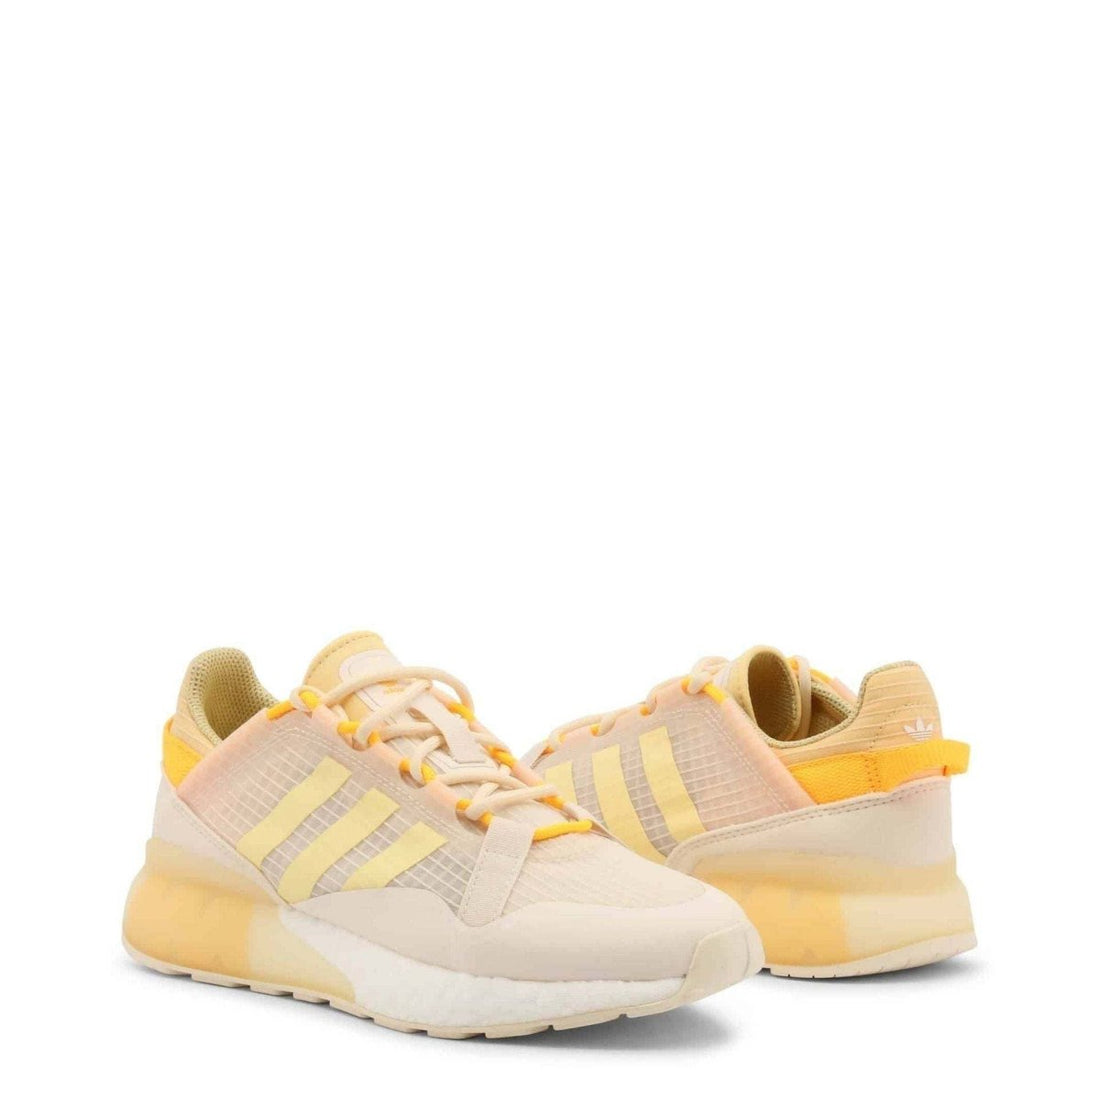 Adidas Sneakers - TINT - Sneakers - Adidas - GZ7875_ZX2K-Boost-Pure:349627